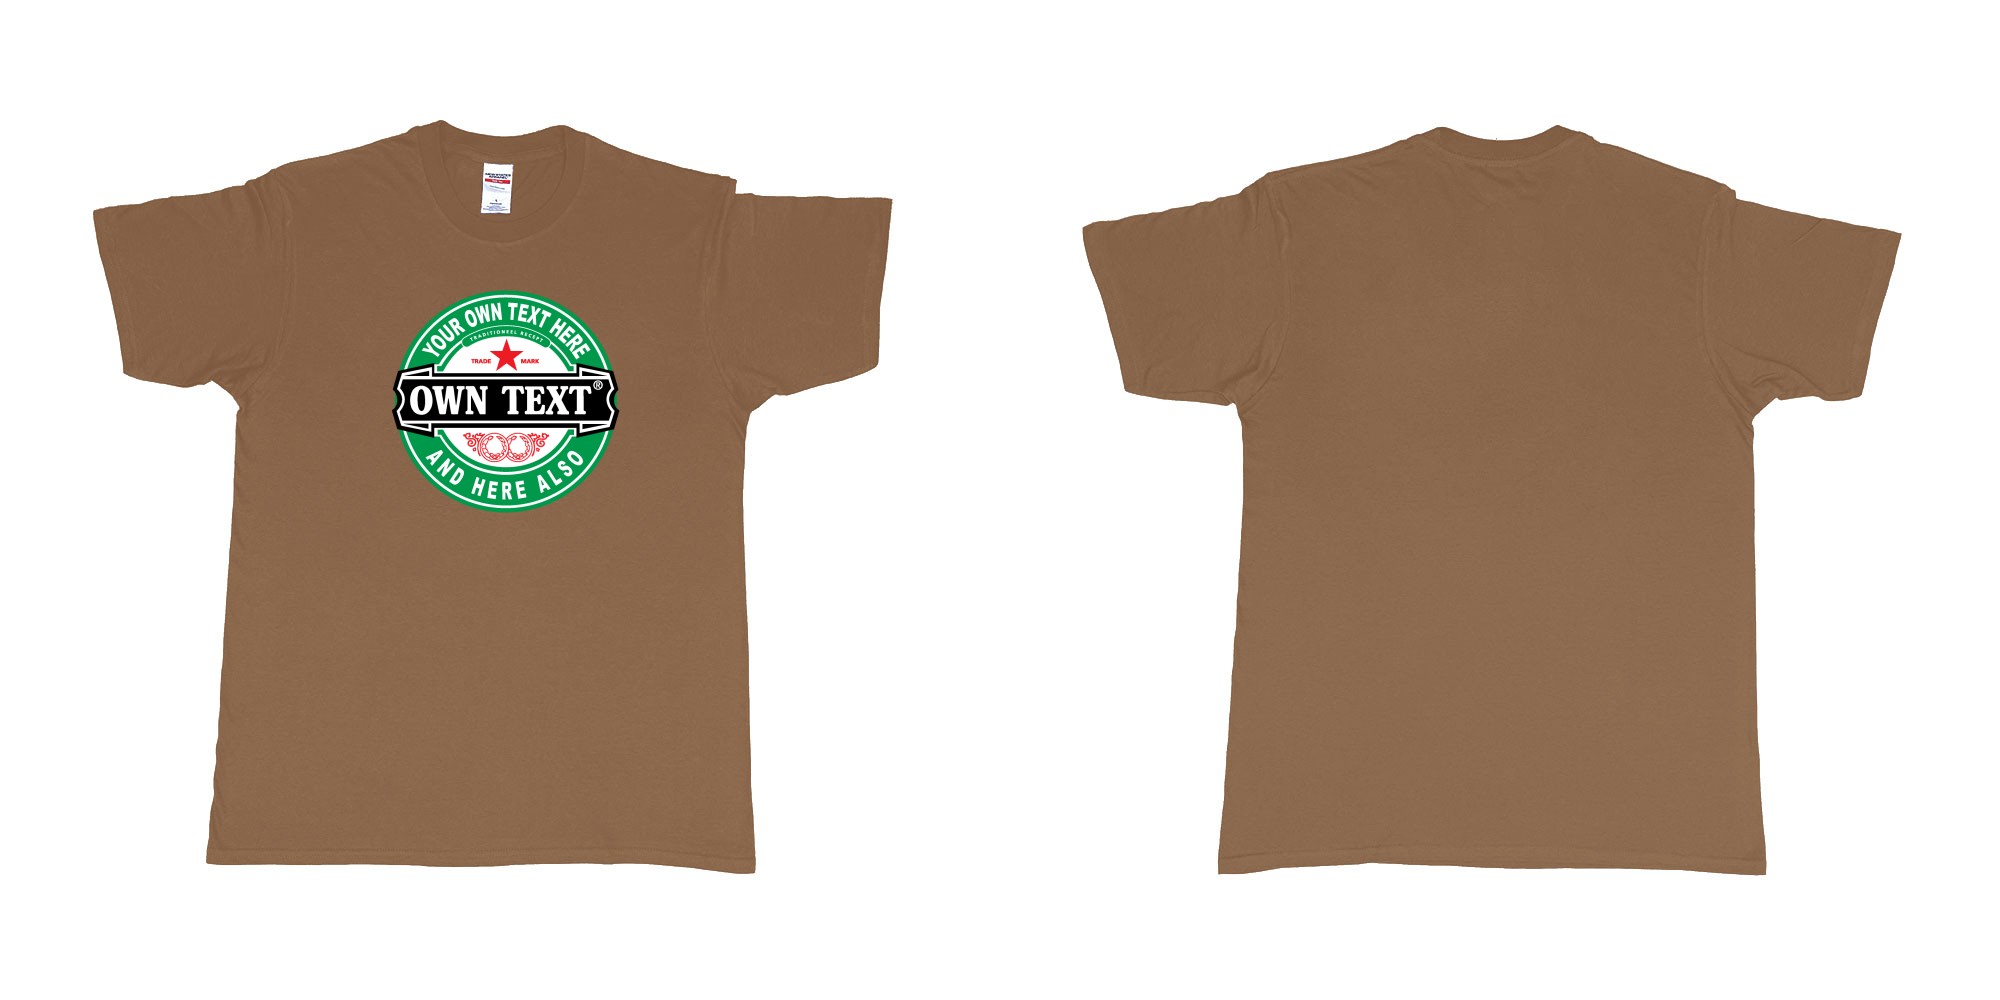 Custom tshirt design Heineken beer in fabric color chestnut choice your own text made in Bali by The Pirate Way